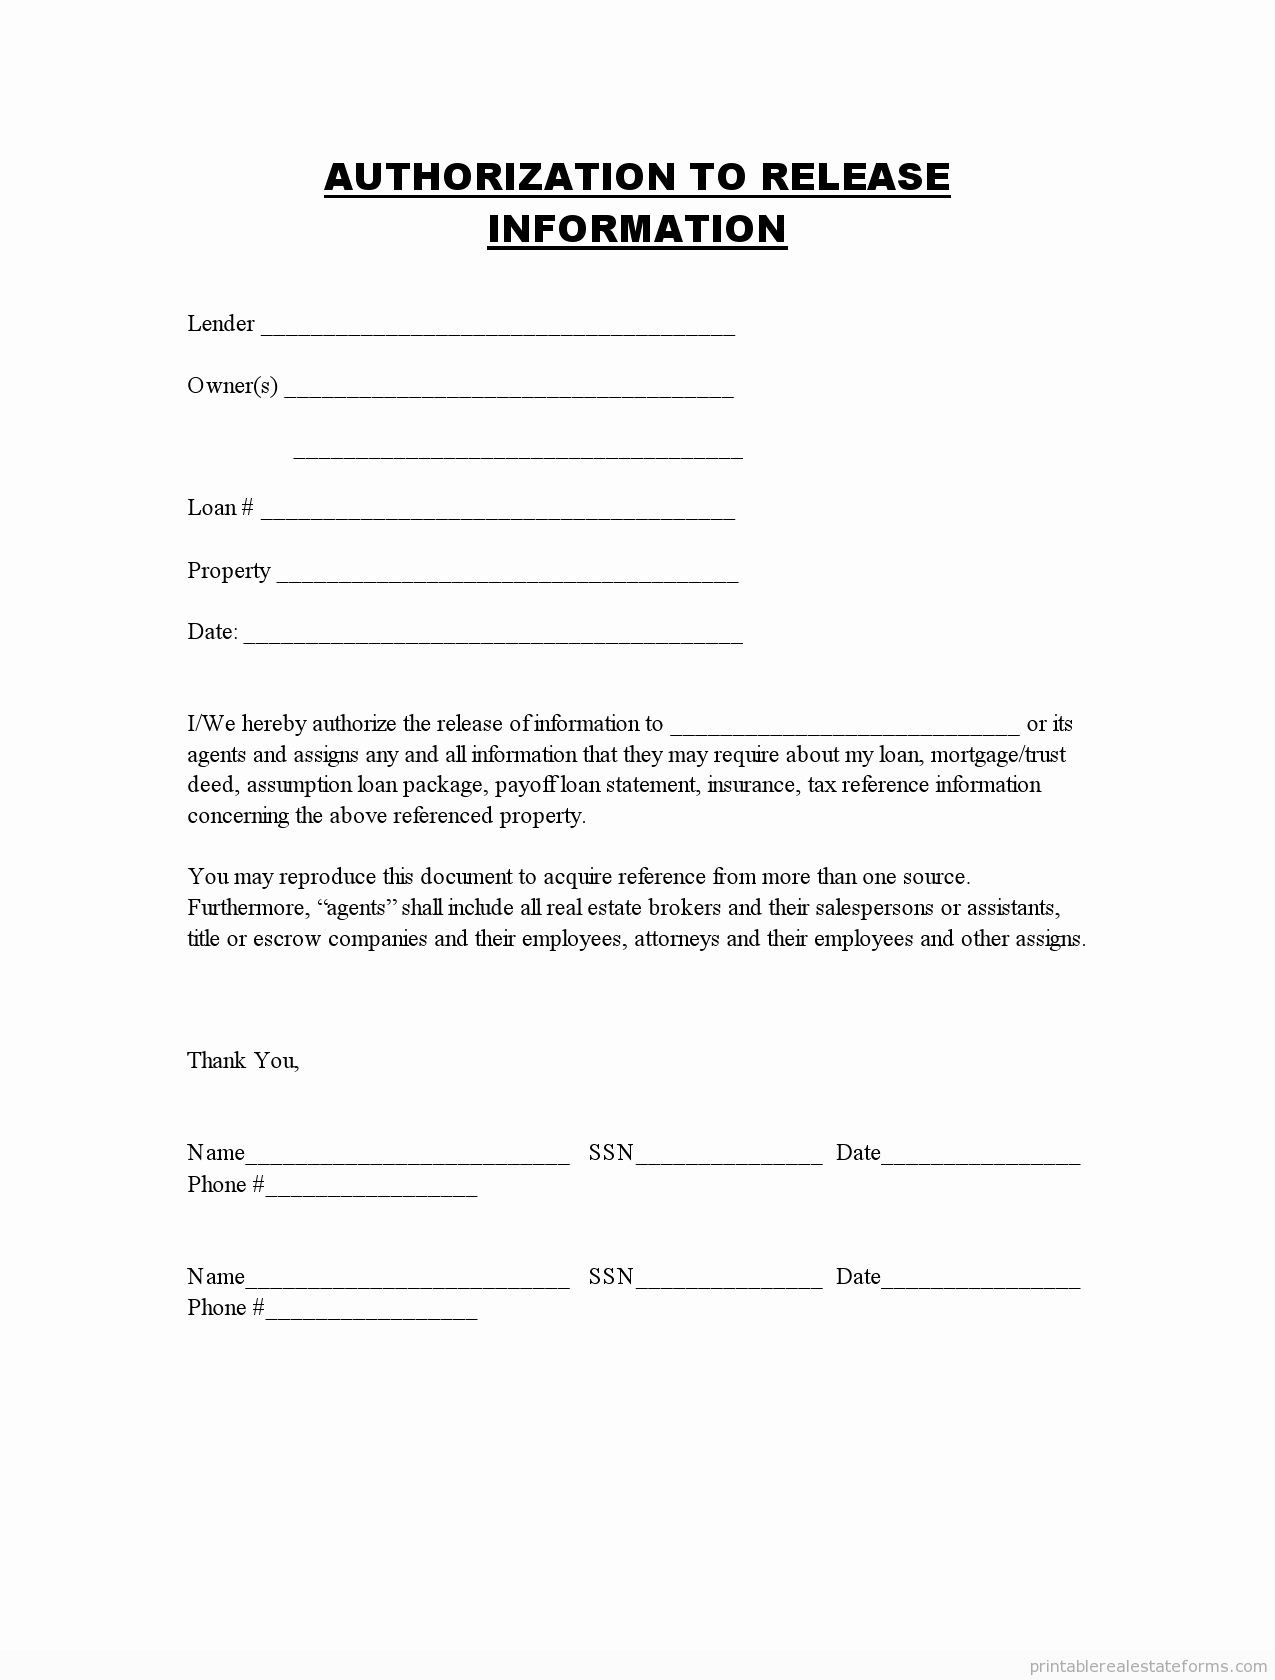 Property Release form Template Fresh Printable Authorization to Release Information Template